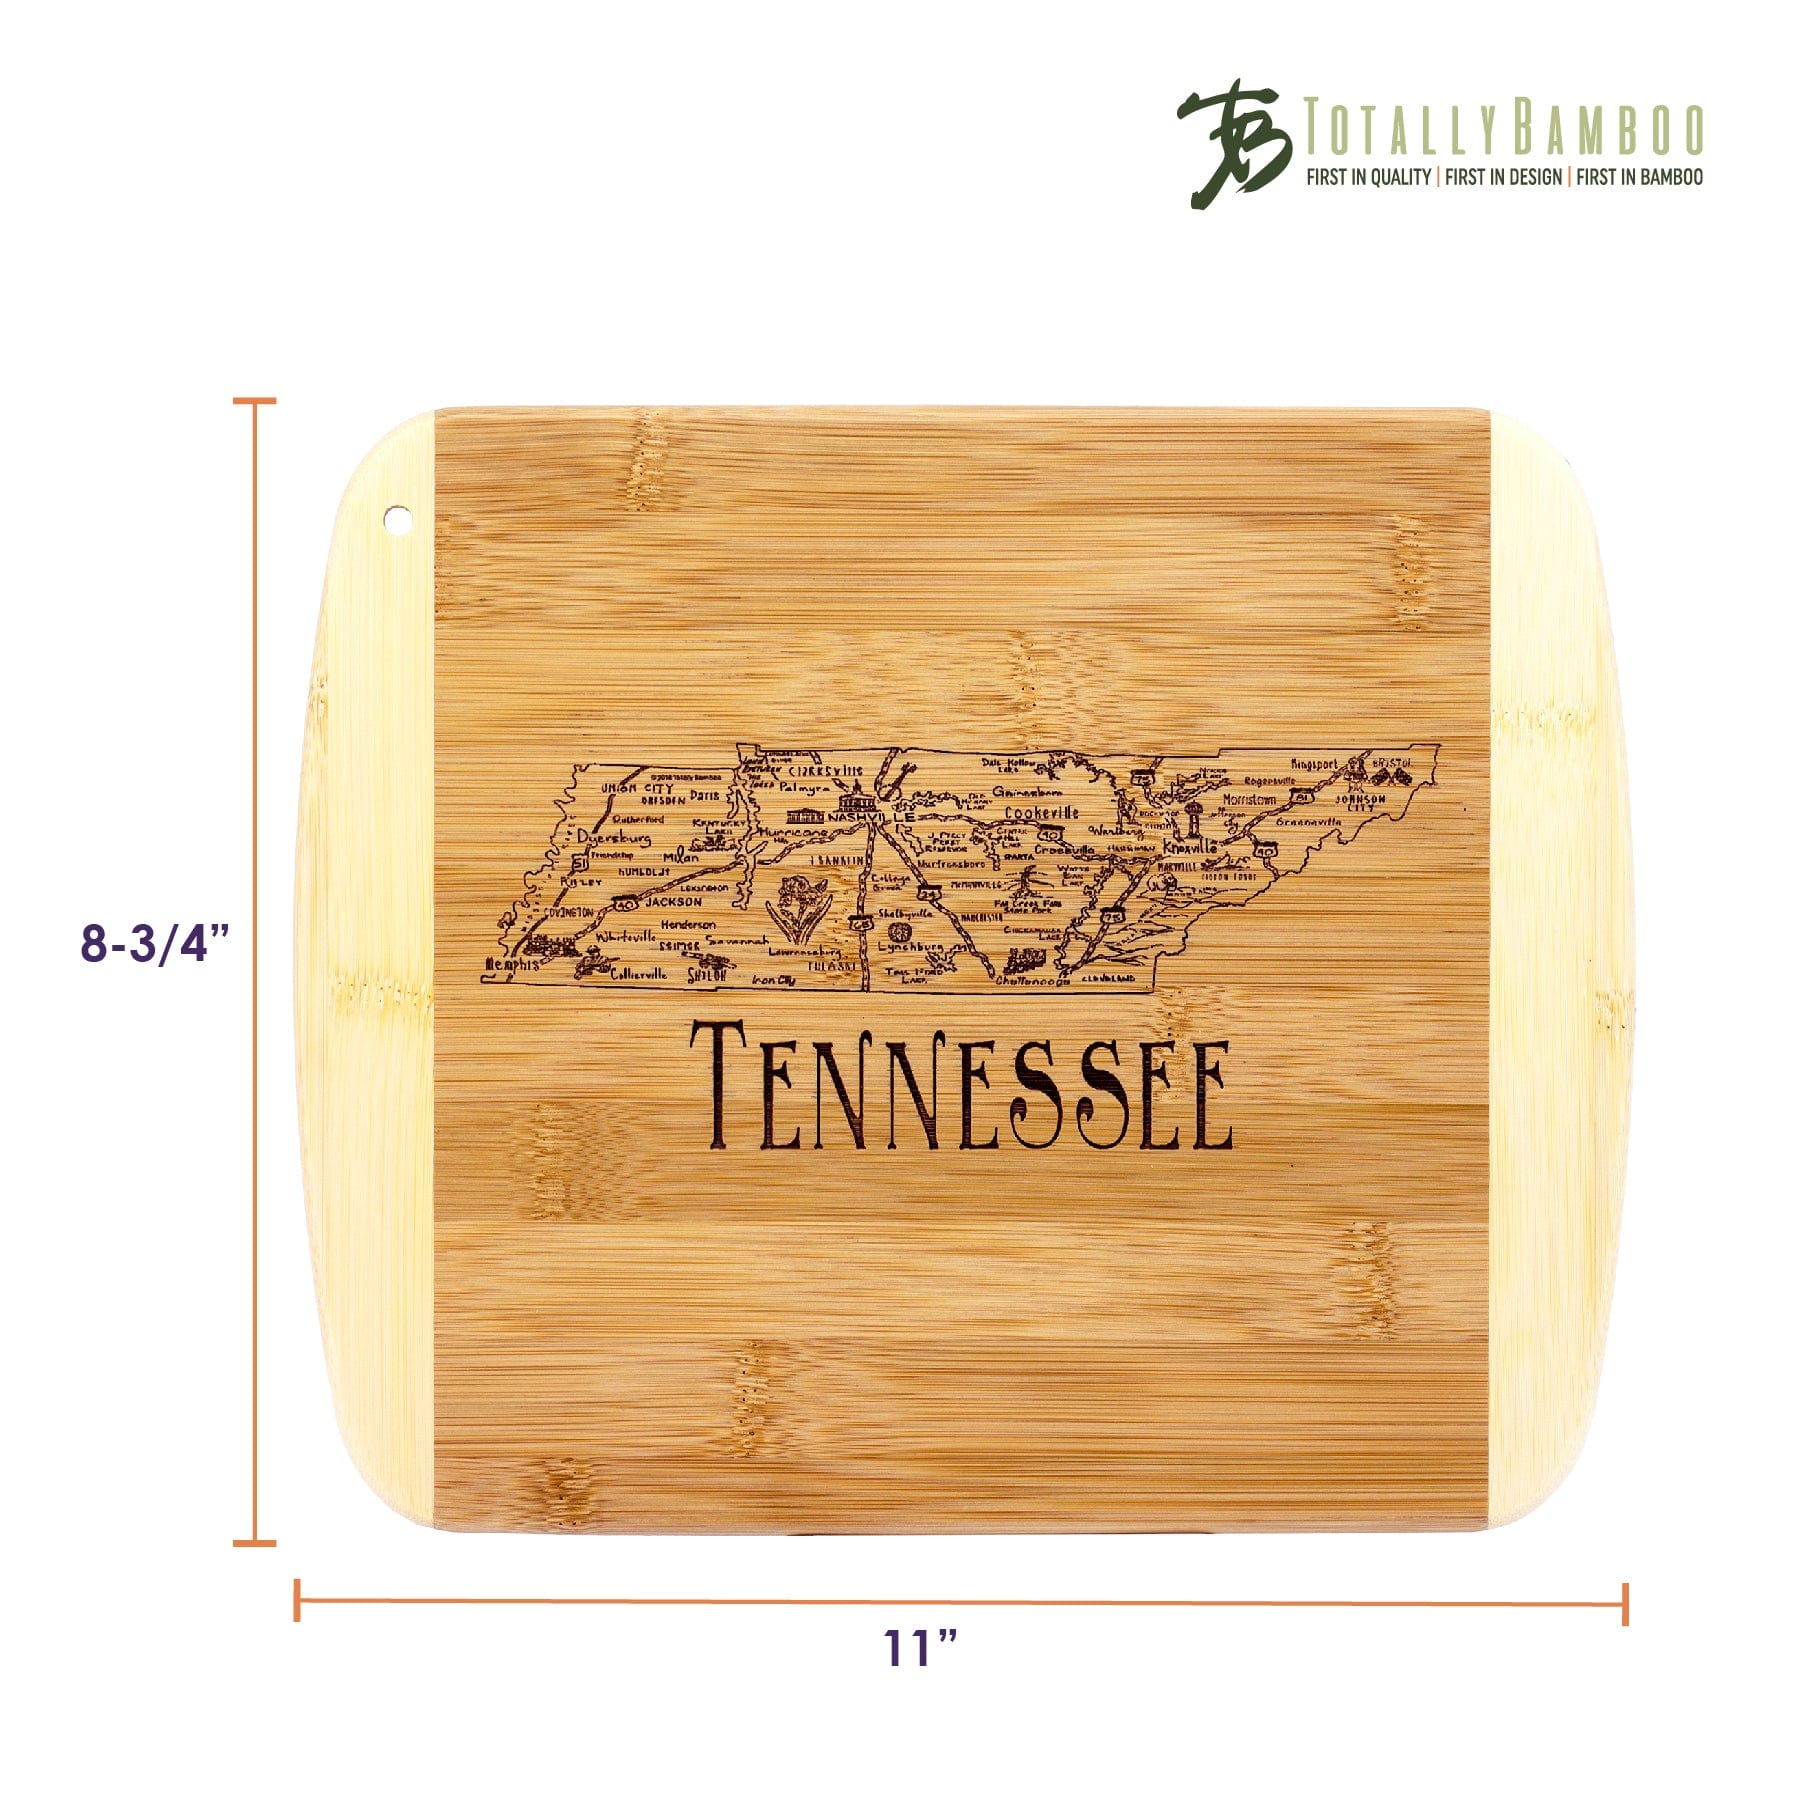 Totally Bamboo A Slice of Life Tennessee Serving and Cutting Board, 11" x 8-3/4"